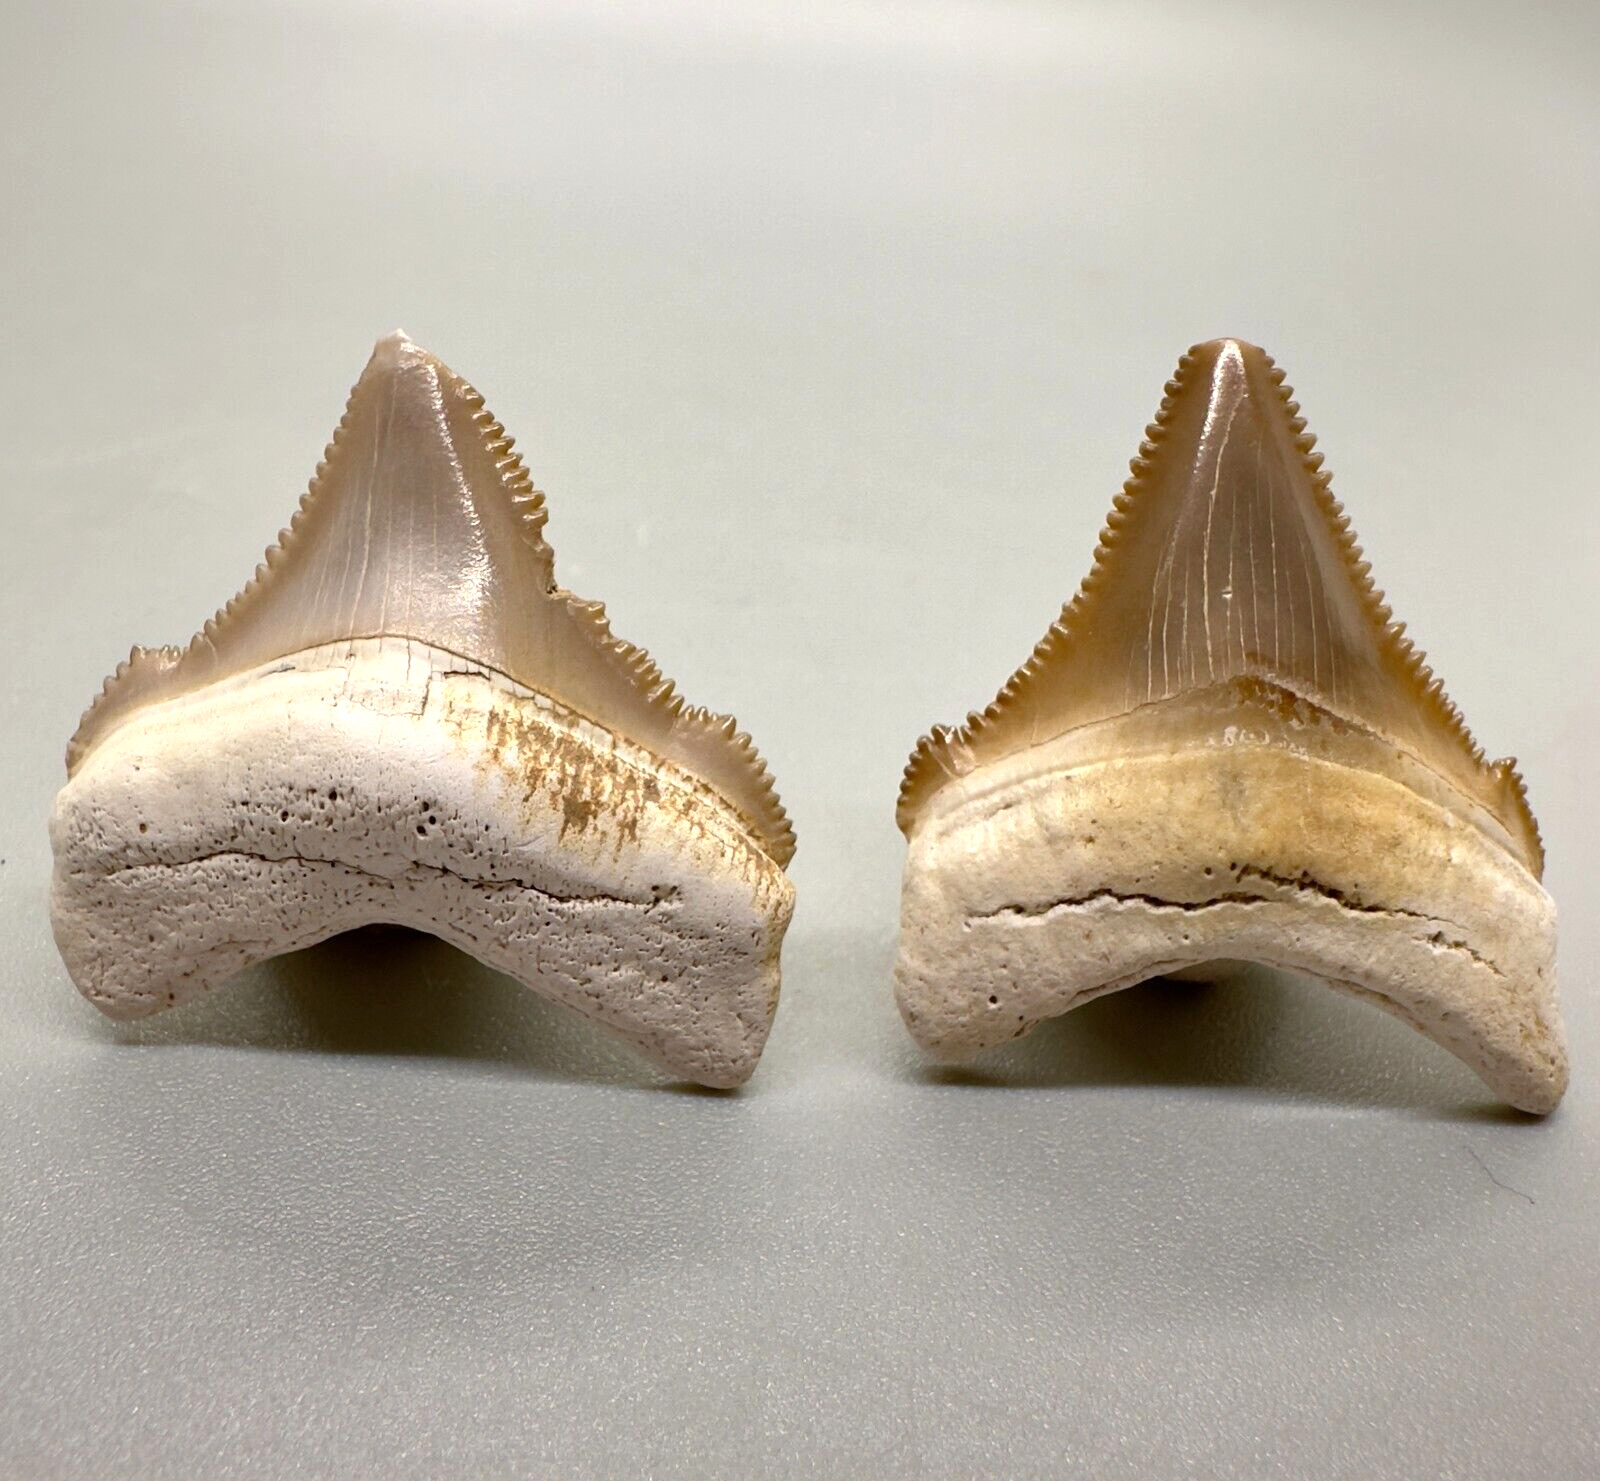 Pair of  Sharply, serrated, Very colorful Fossil CHUBUTENSIS Teeth- Peru